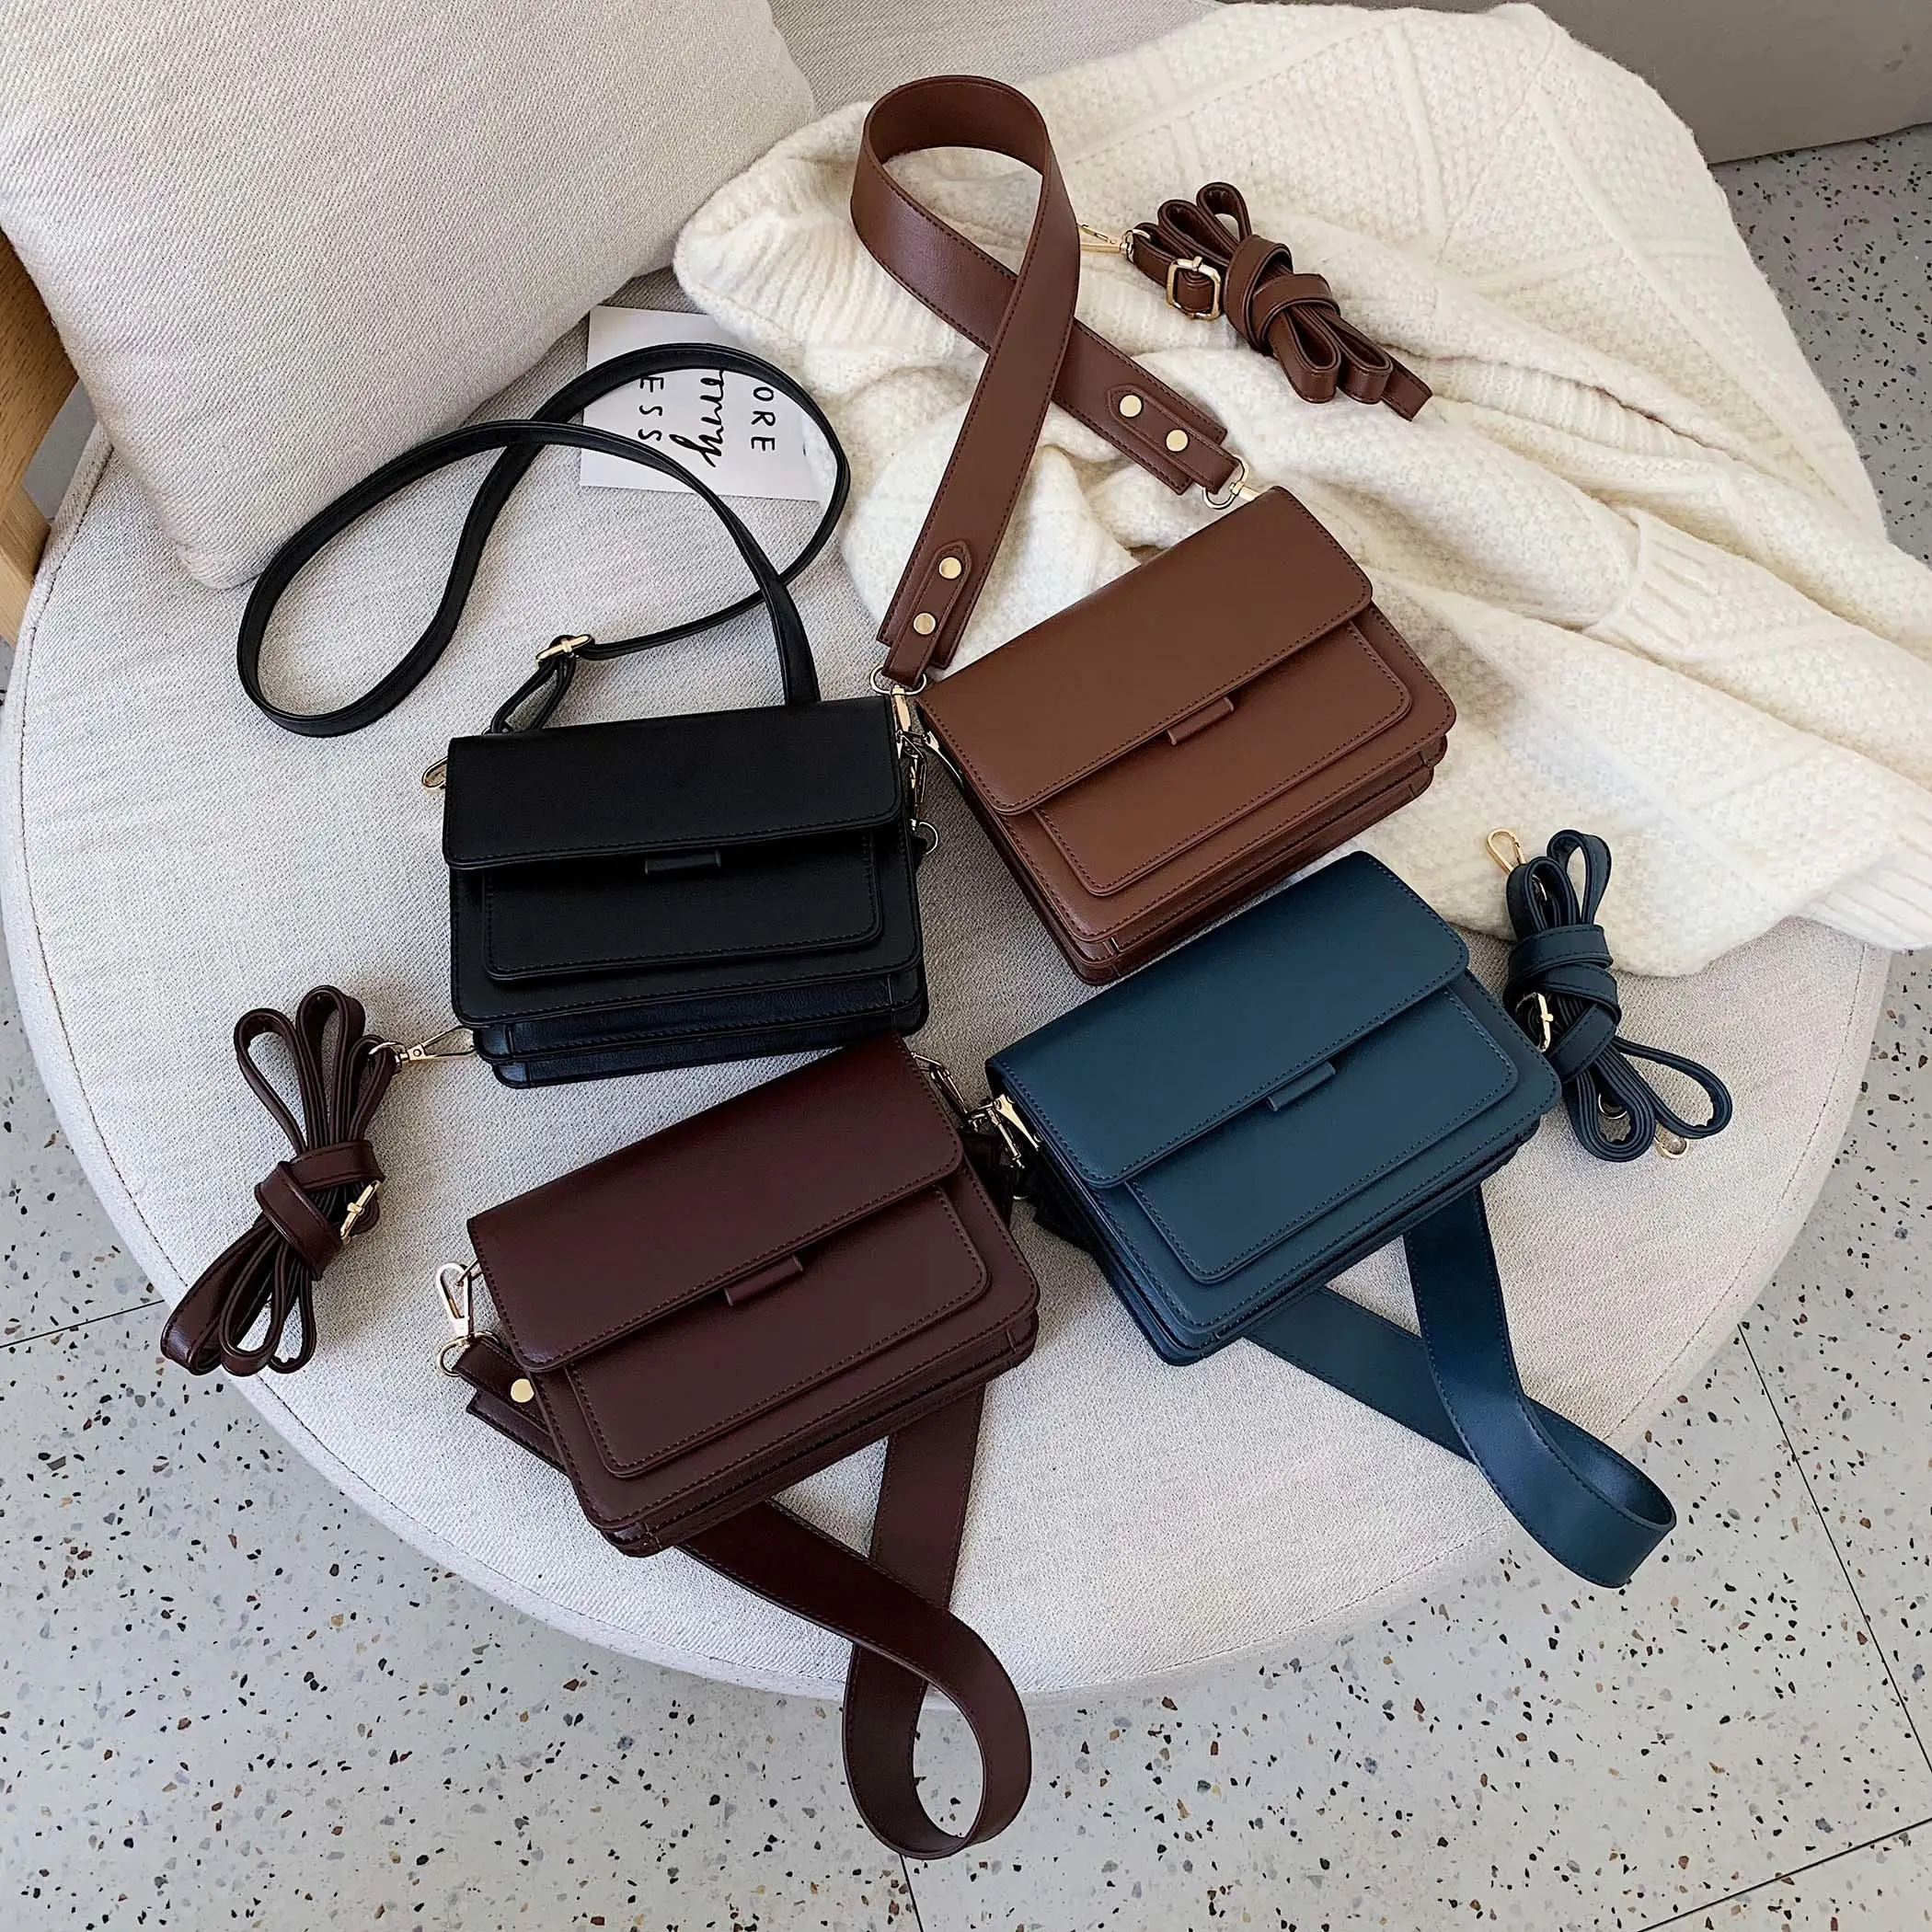 Design Hot Sell Shoulder Handbags 2022 Women Purses Ladies PU Leather Hand bags For Females leather bags women handbags